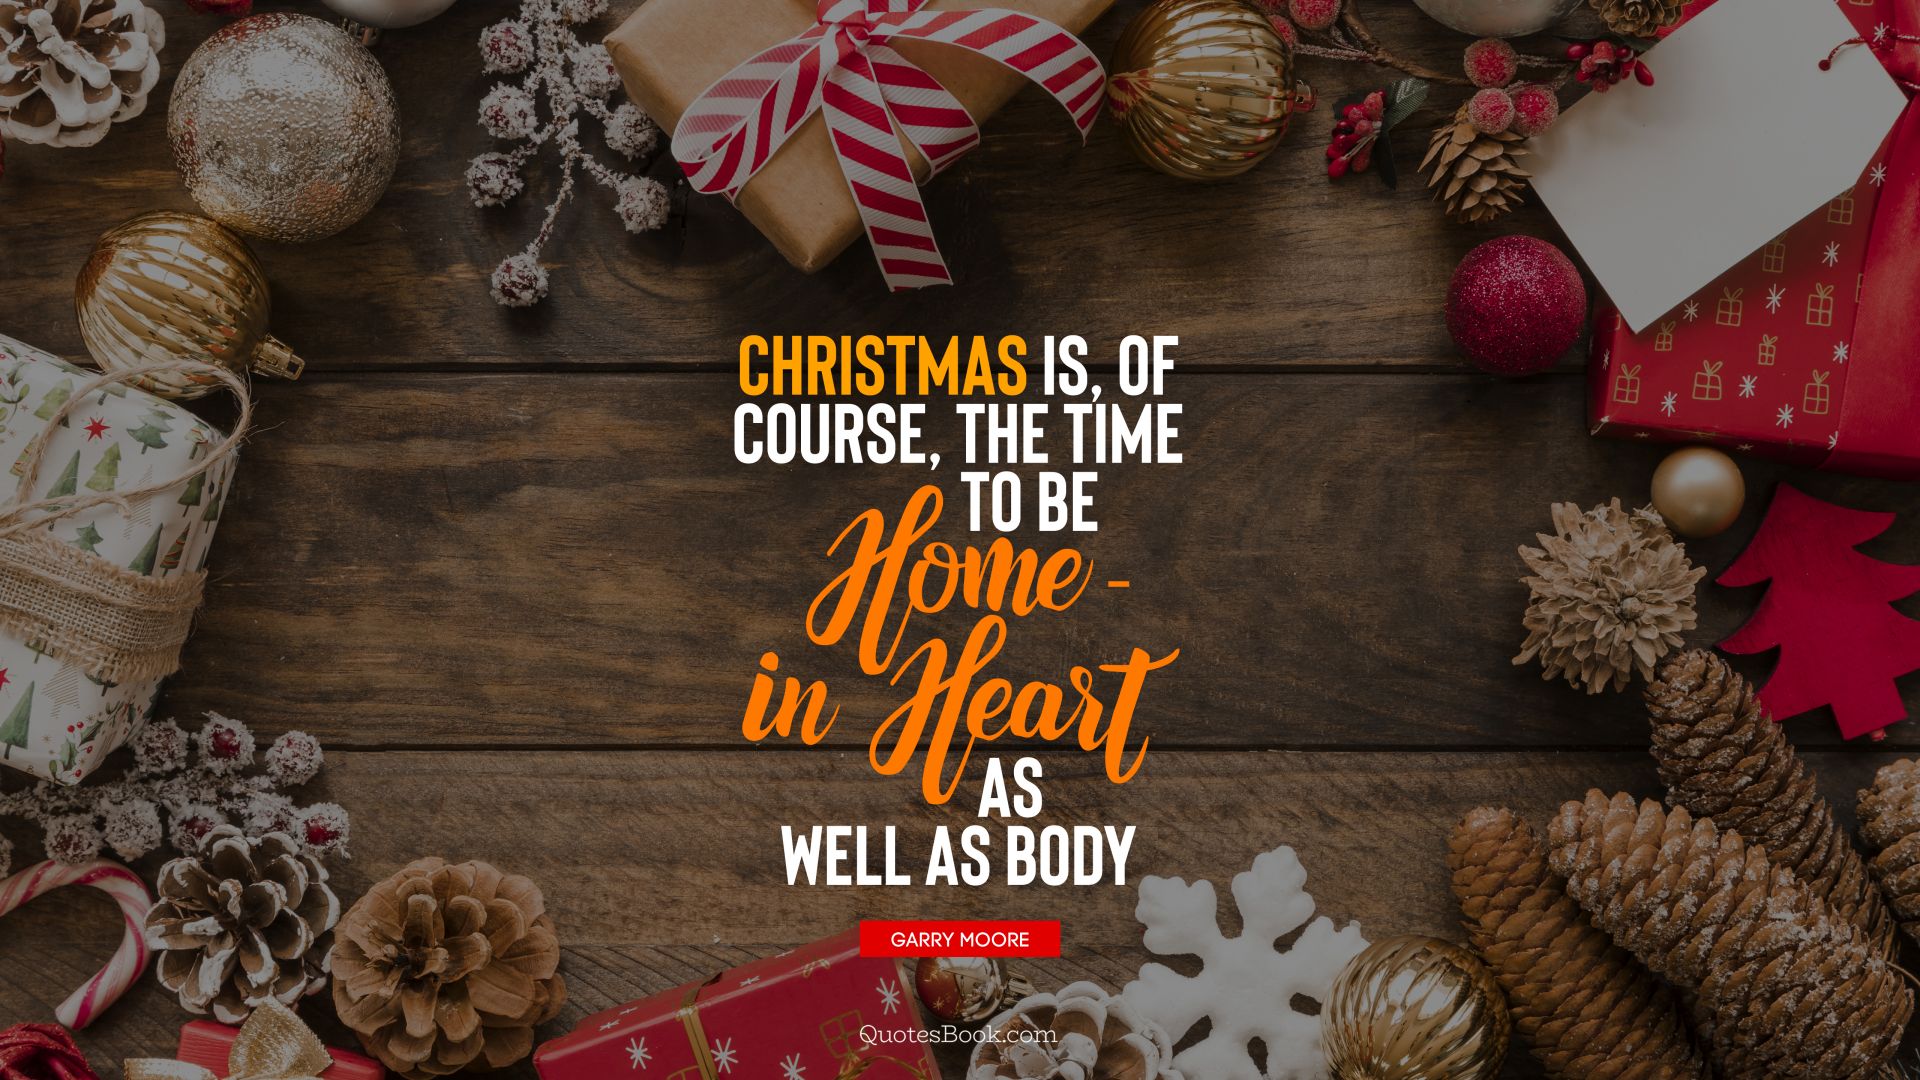 Christmas is, of course, the time to be home - in heart as well as body. - Quote by Garry Moore